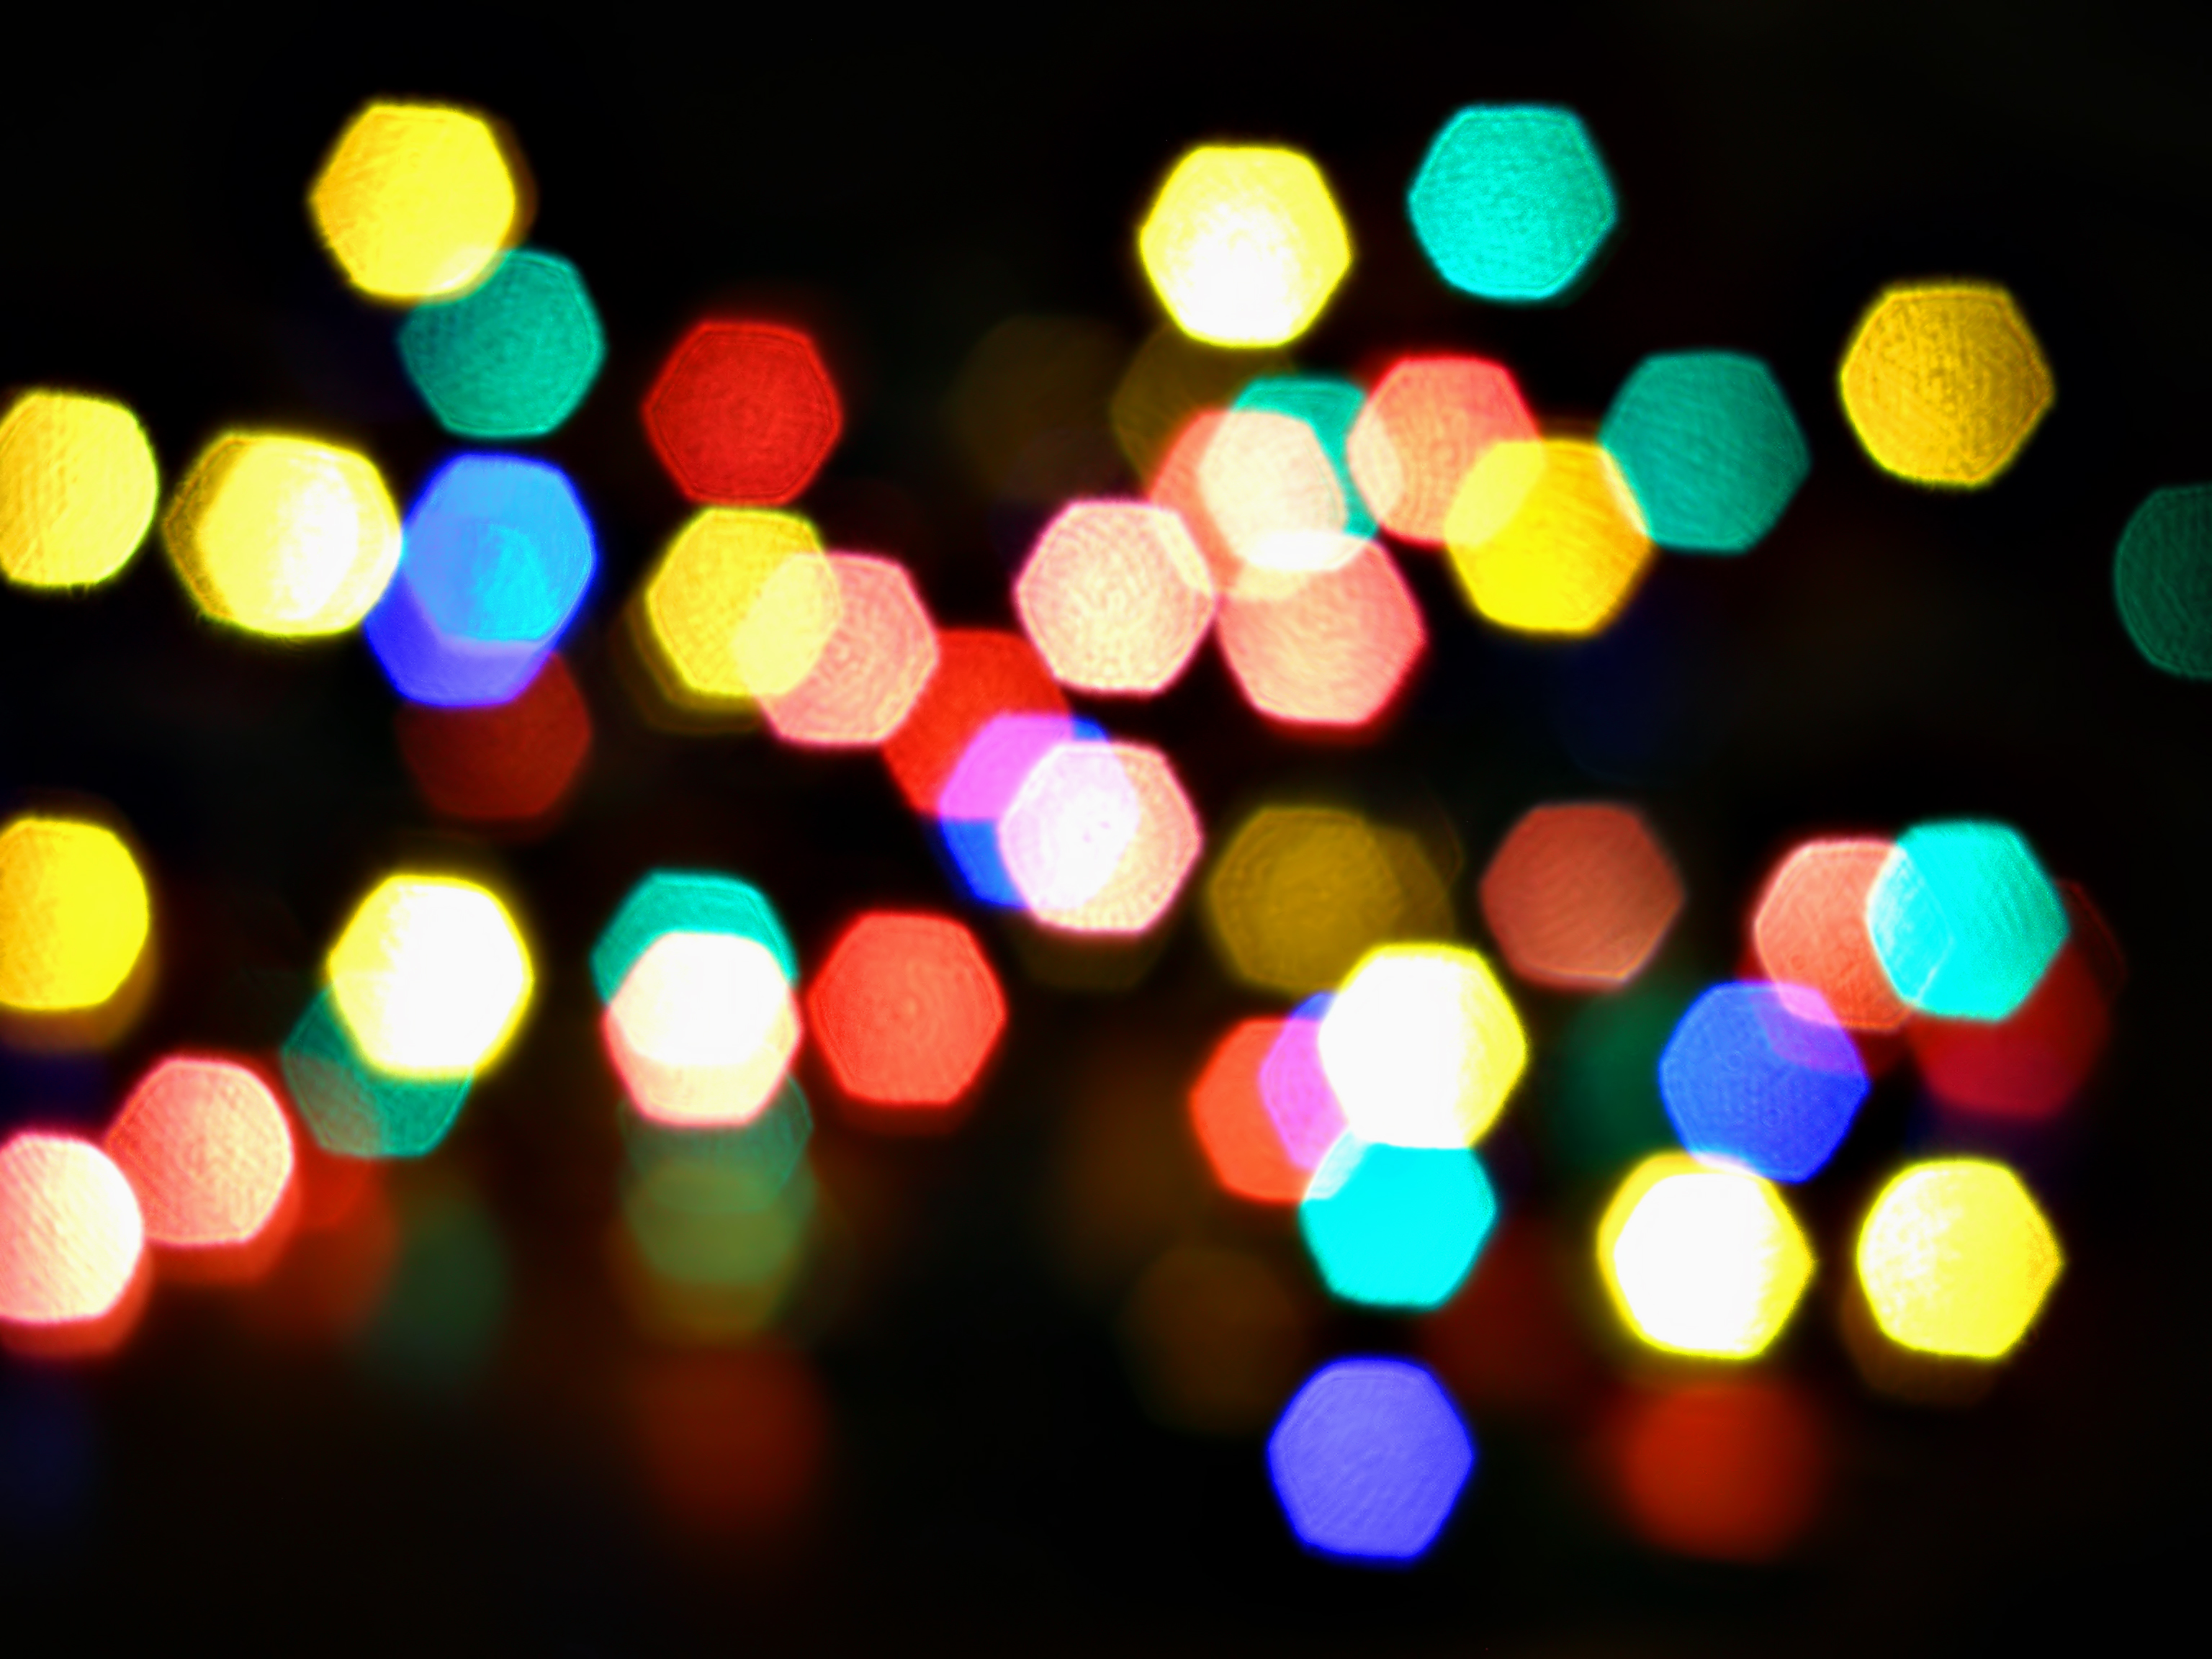 Blurry Christmas Lights Background